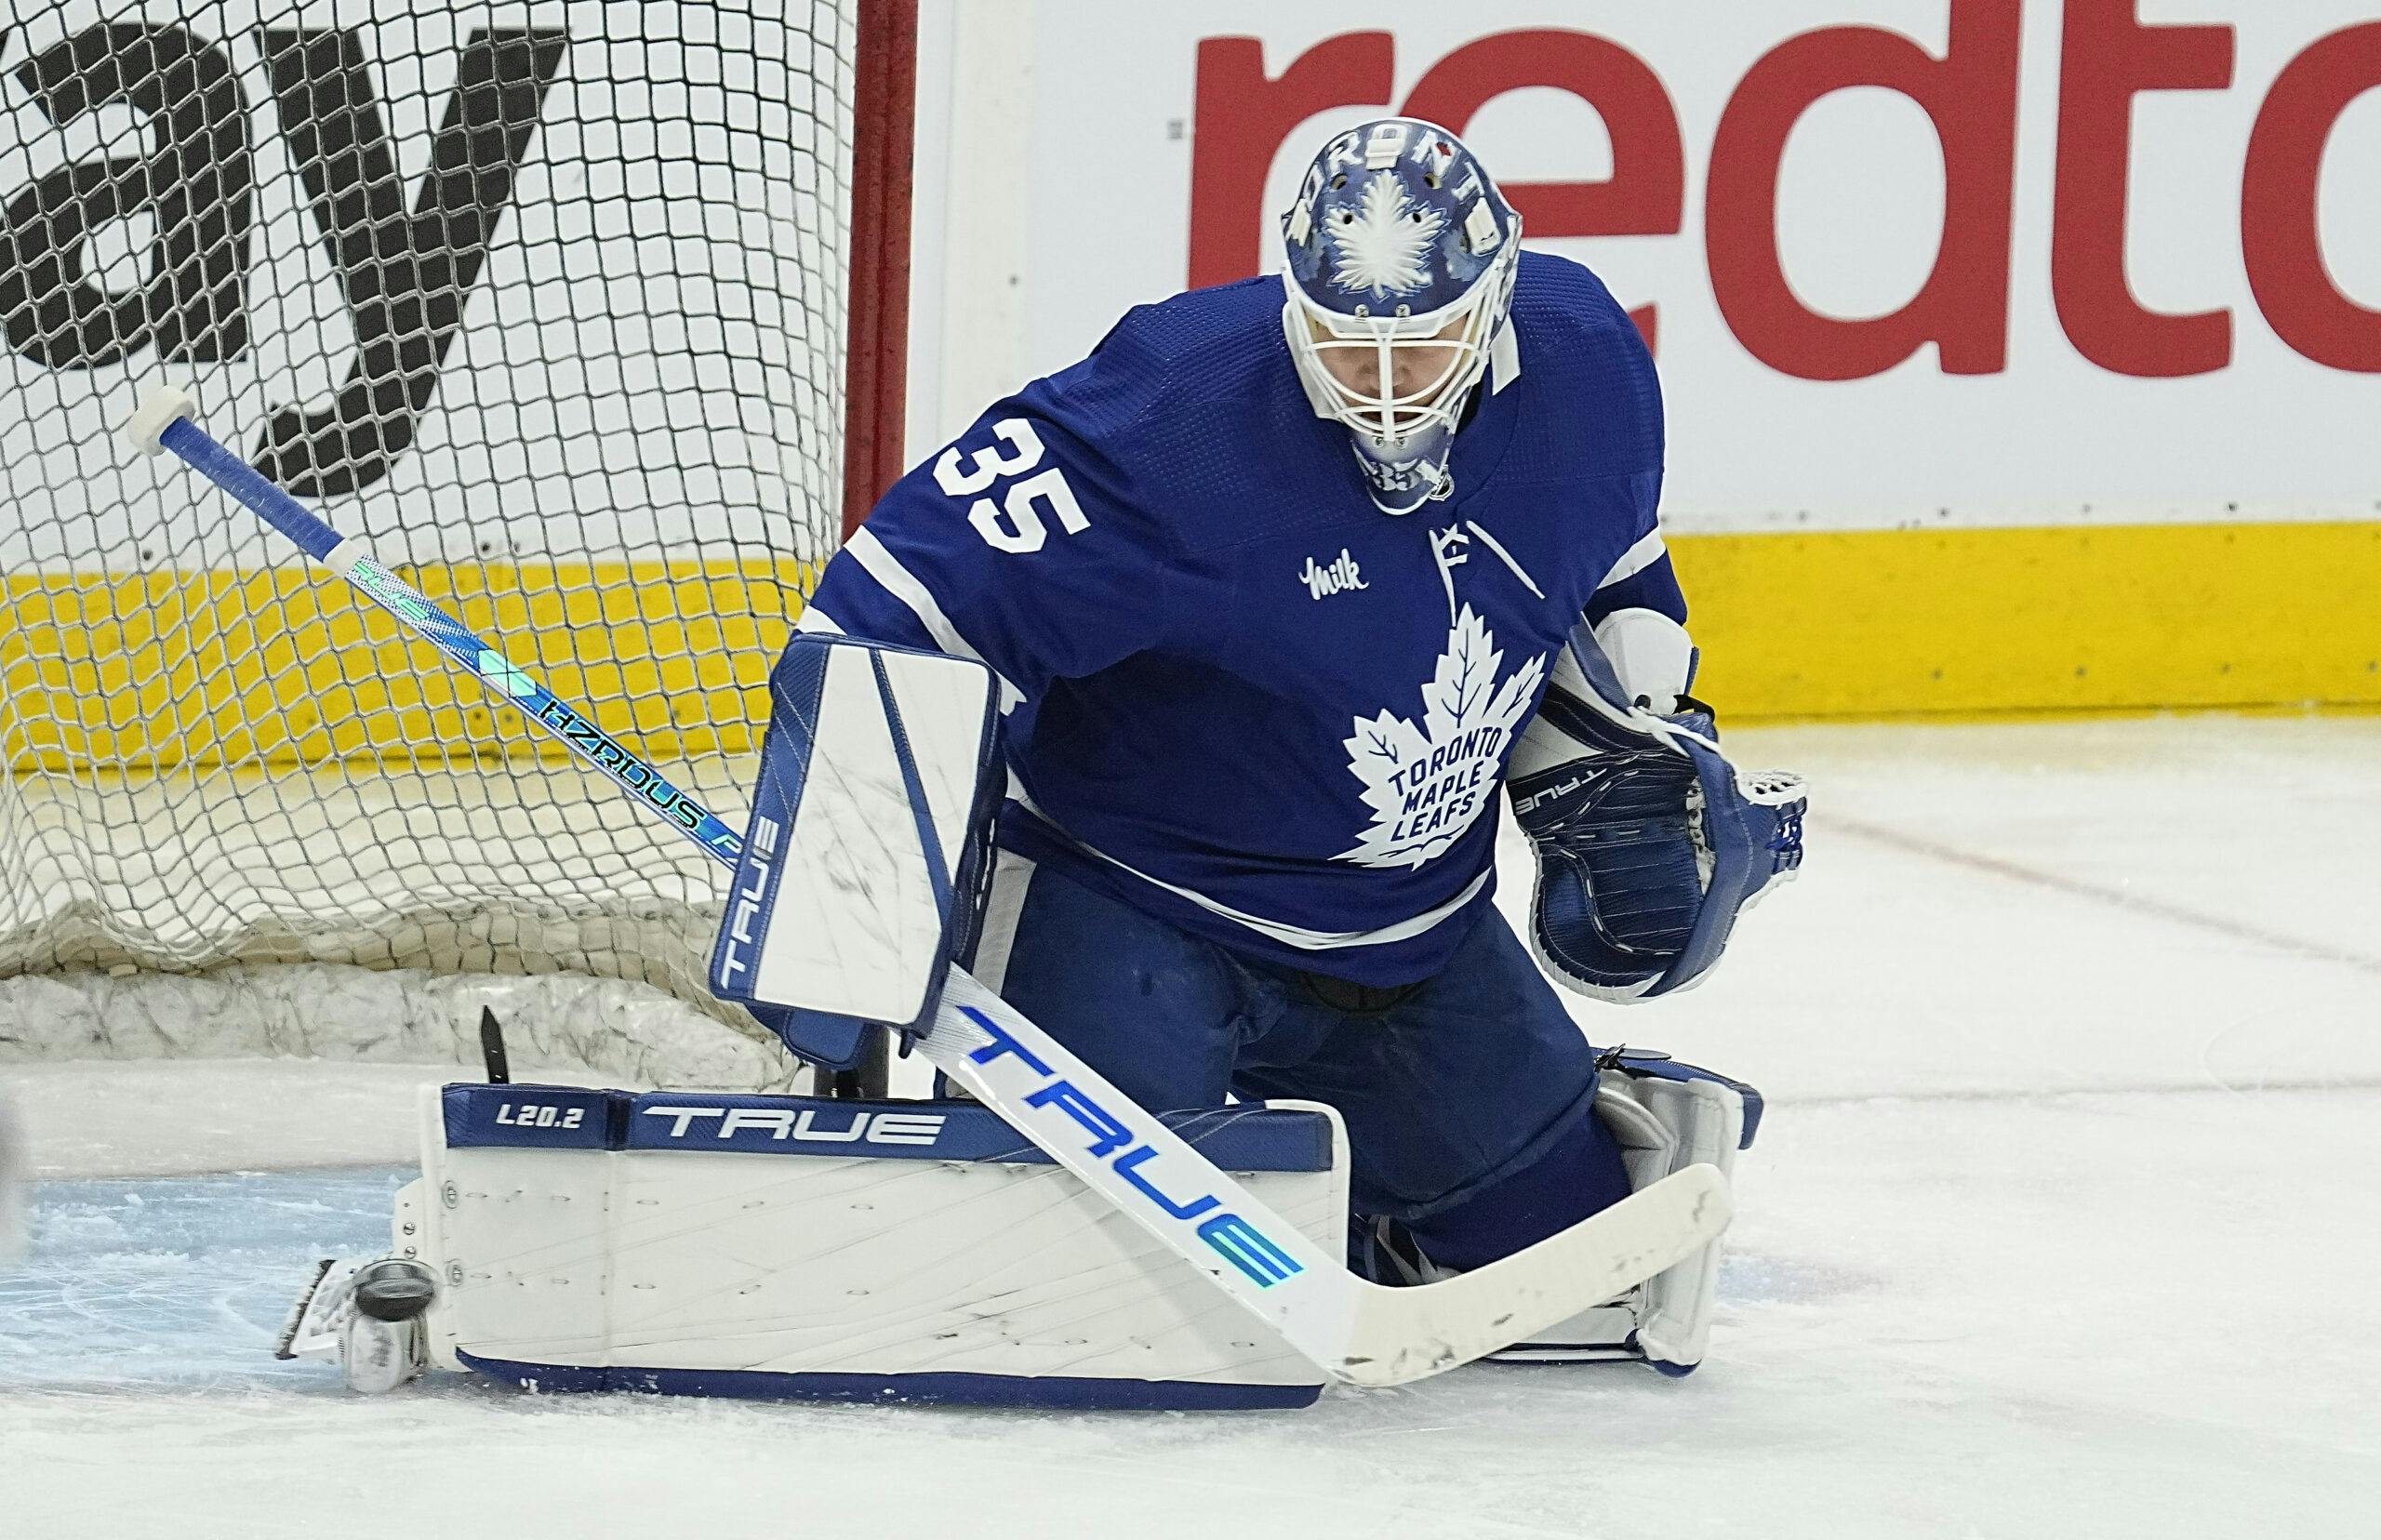 Toronto Maple Leafs: What to know about Game 1